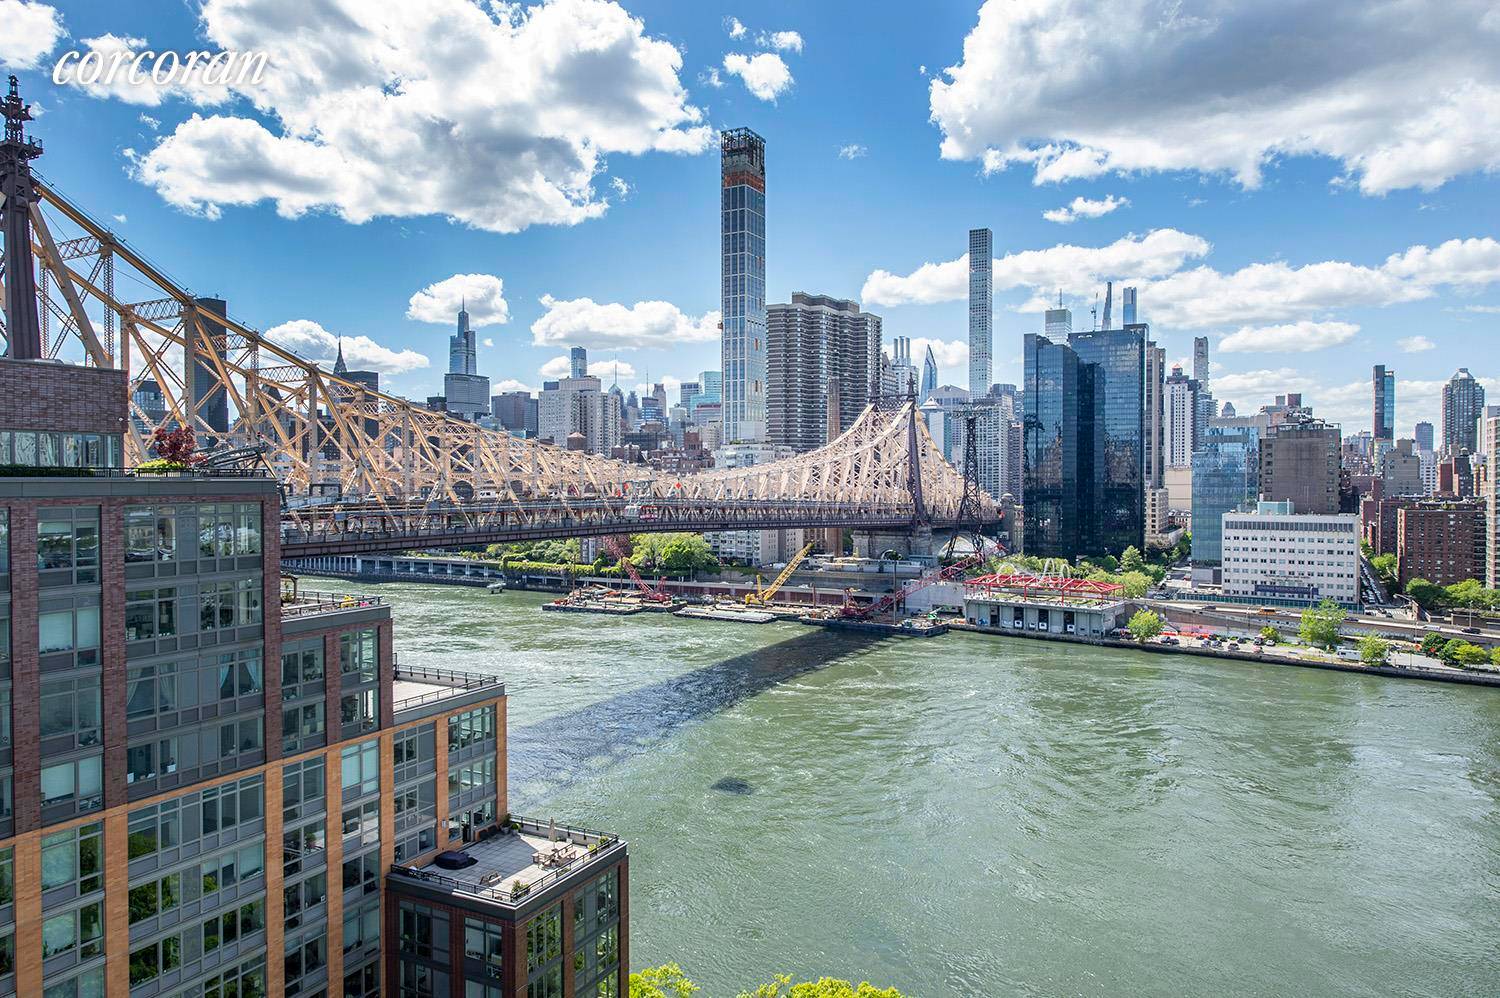 Rarely Available Brand New Massive 900 sqft 1 Bedroom Convertible 2br Apartment With Storage Available to Purchase in the Most Desirable Condo Building on Roosevelt Island !